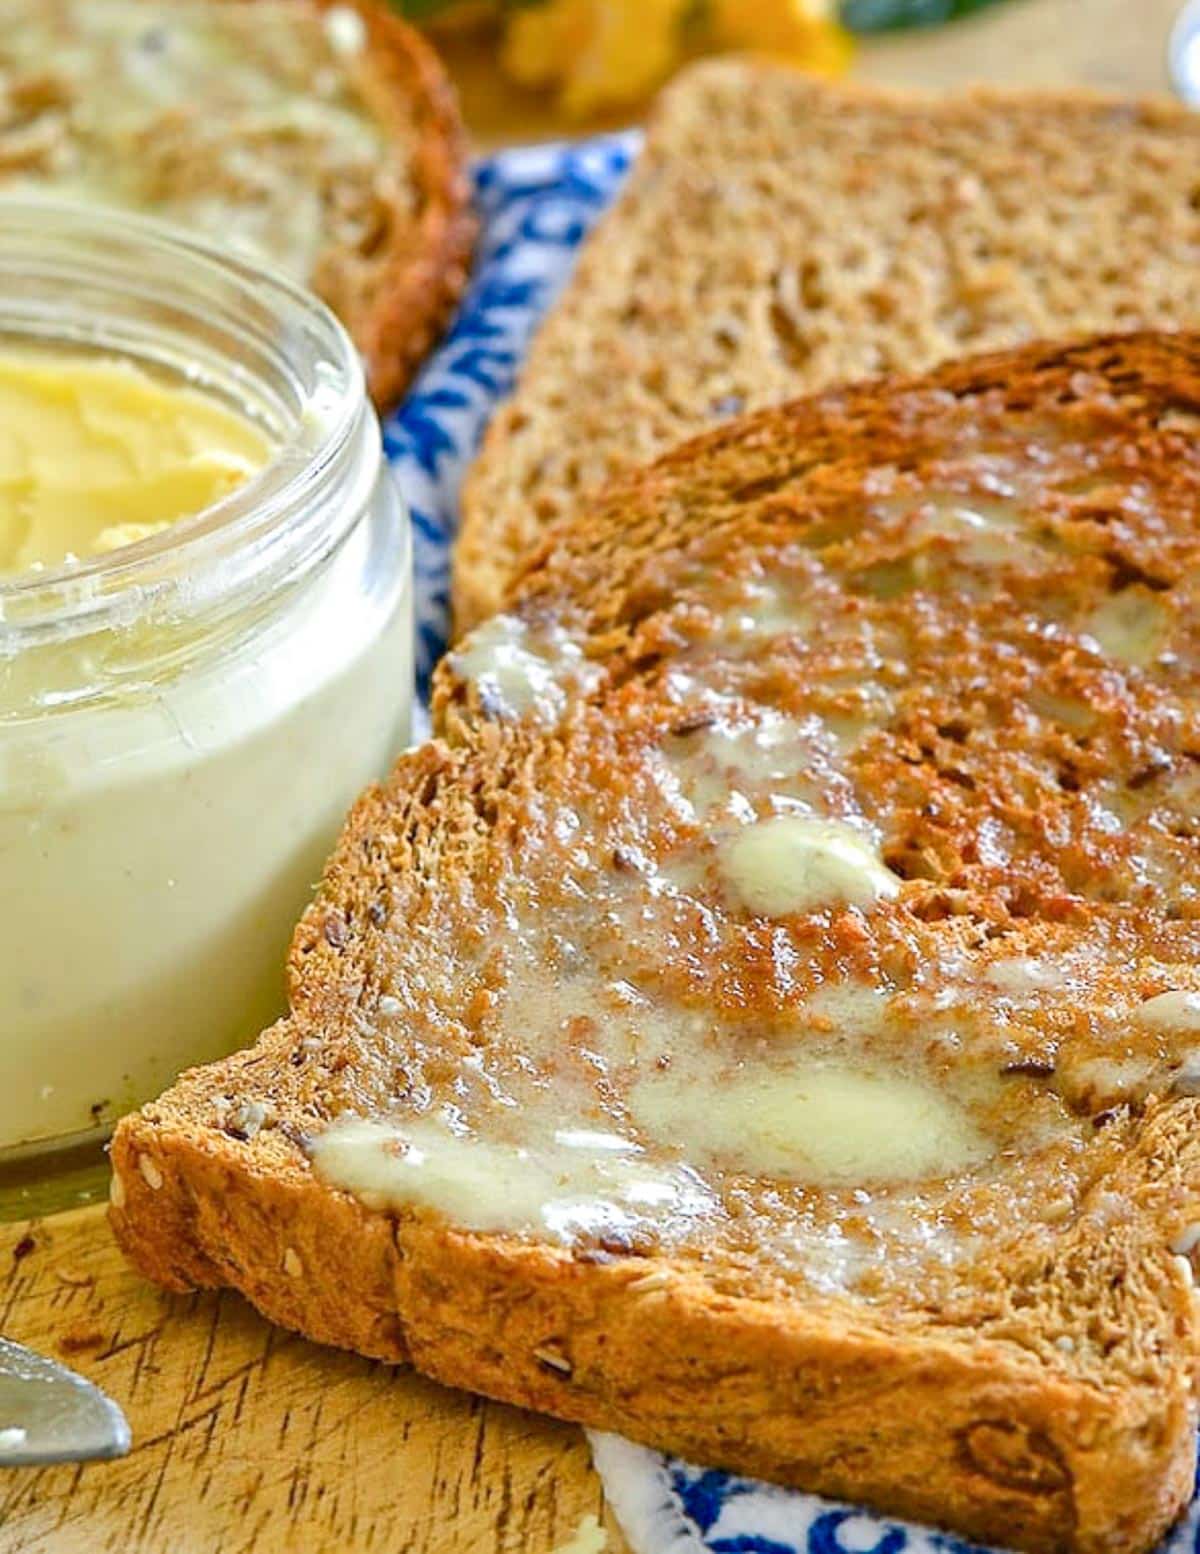 s slice of toast spread with melting butter